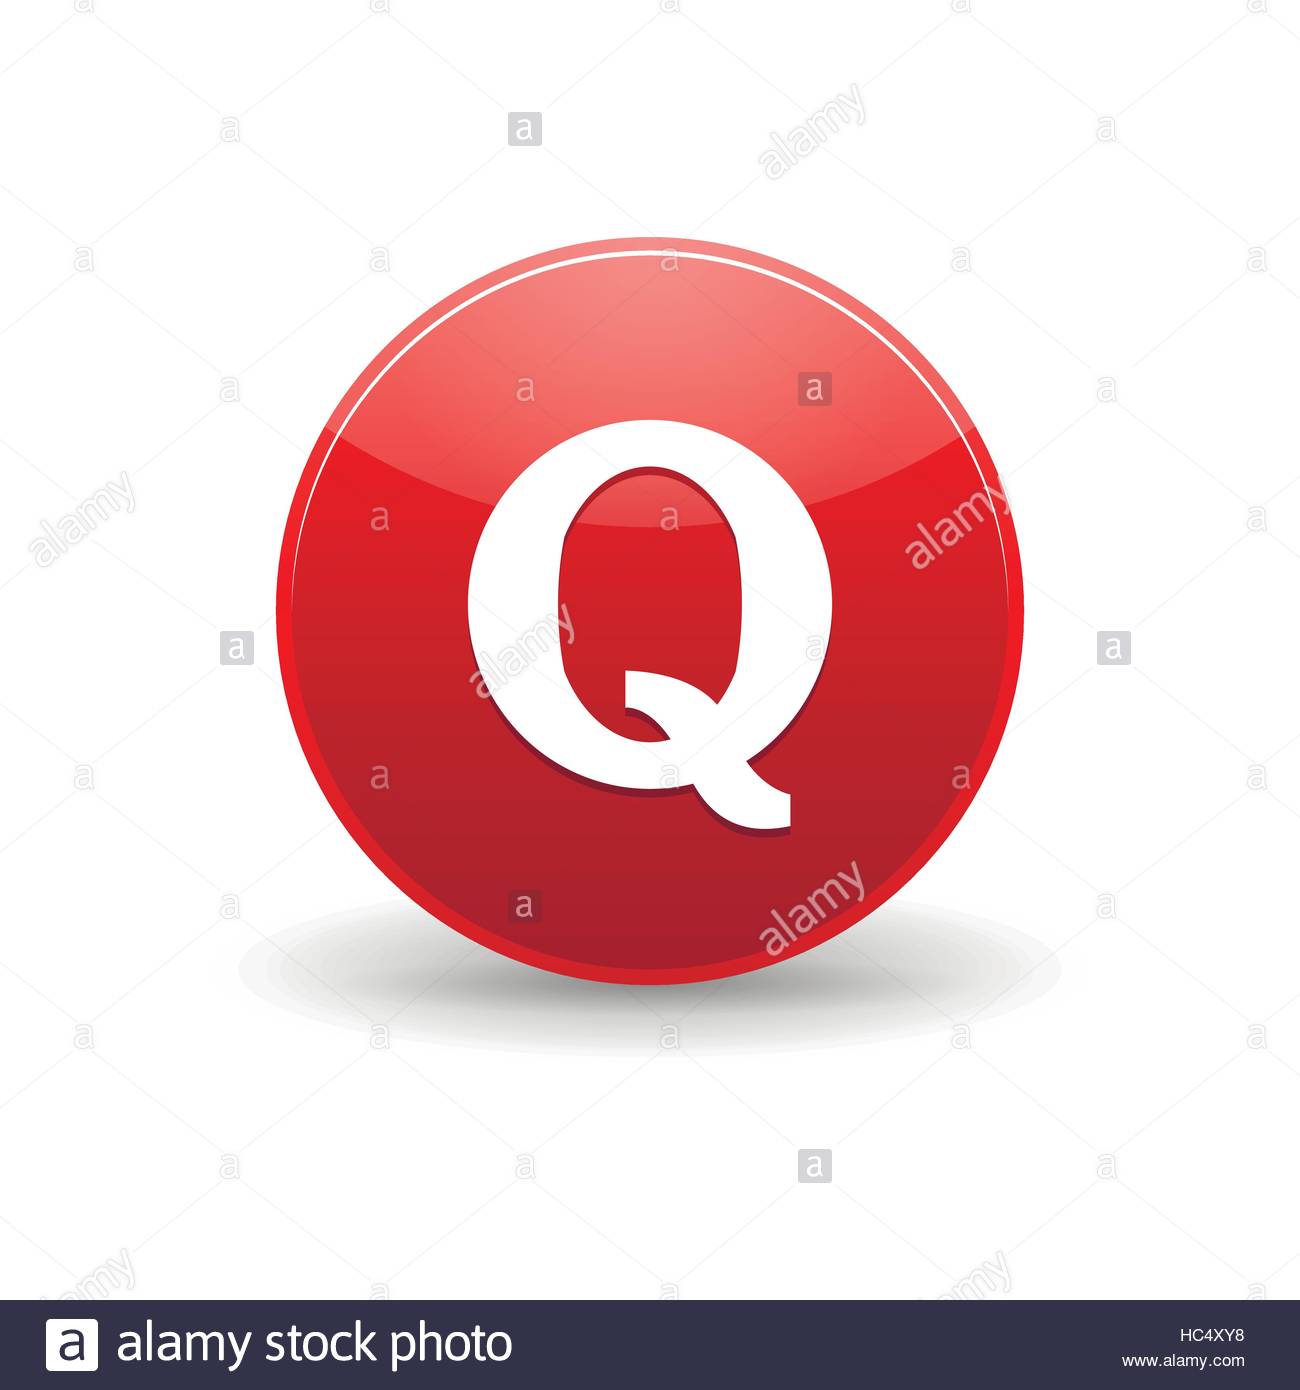 Is Quoras icon inspired by Quick Heal? - Quora